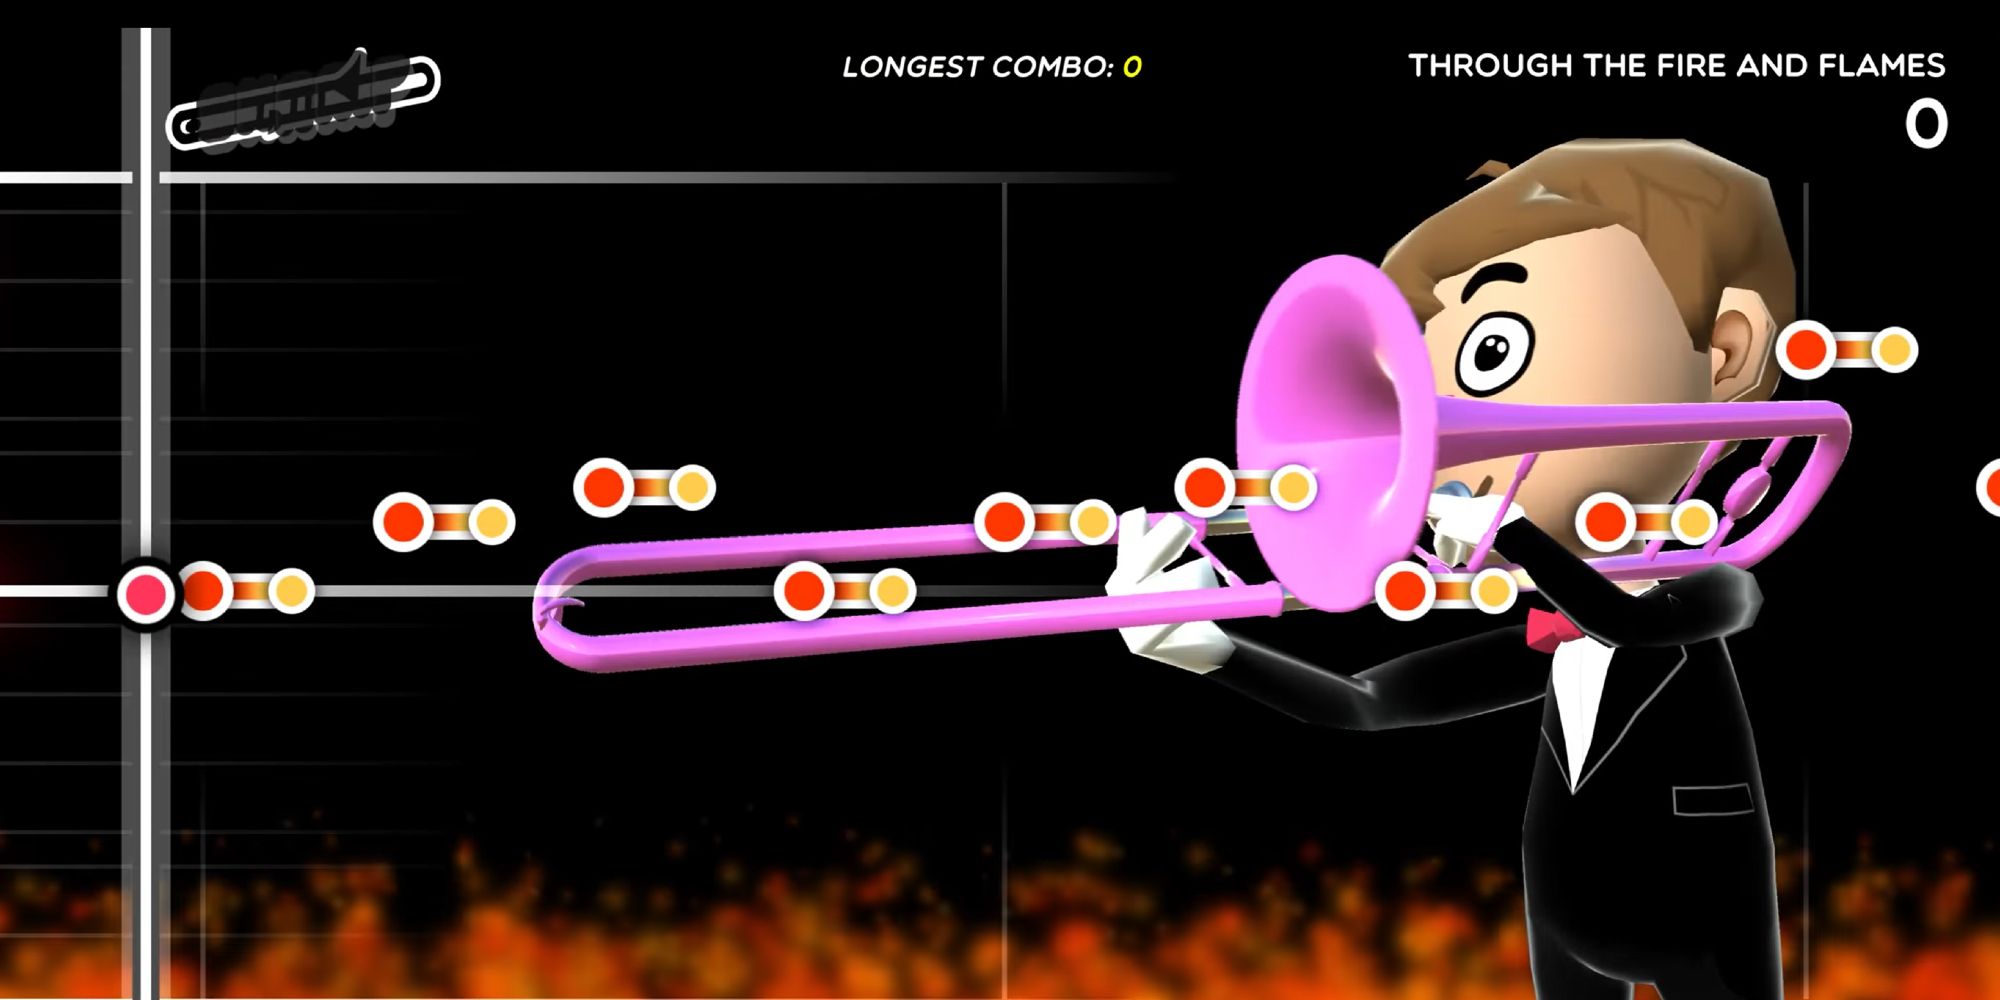 A trombone player with a pink trombone playing Through the Fire and Flames